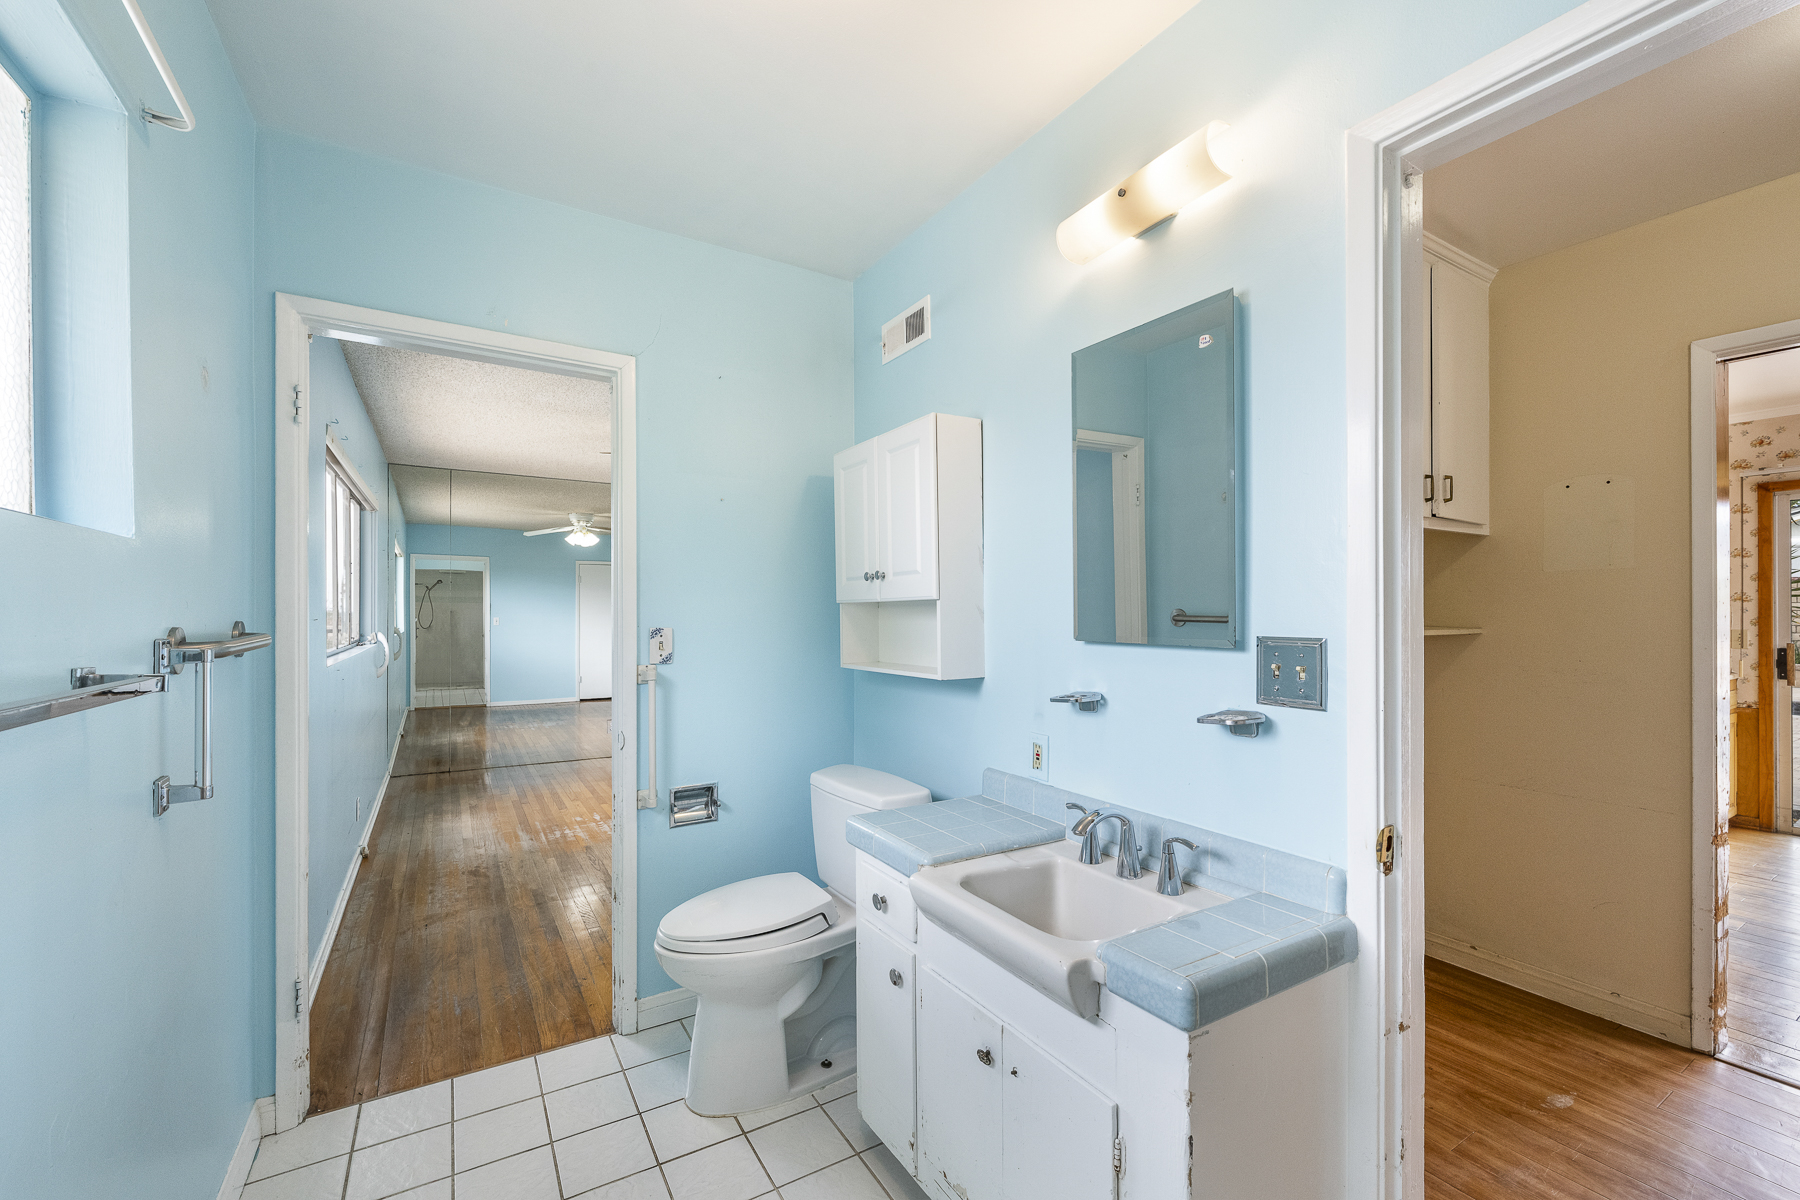 501 Dorothy Drive: Hallway view of master bathroom, handicap accessible toilet and sink